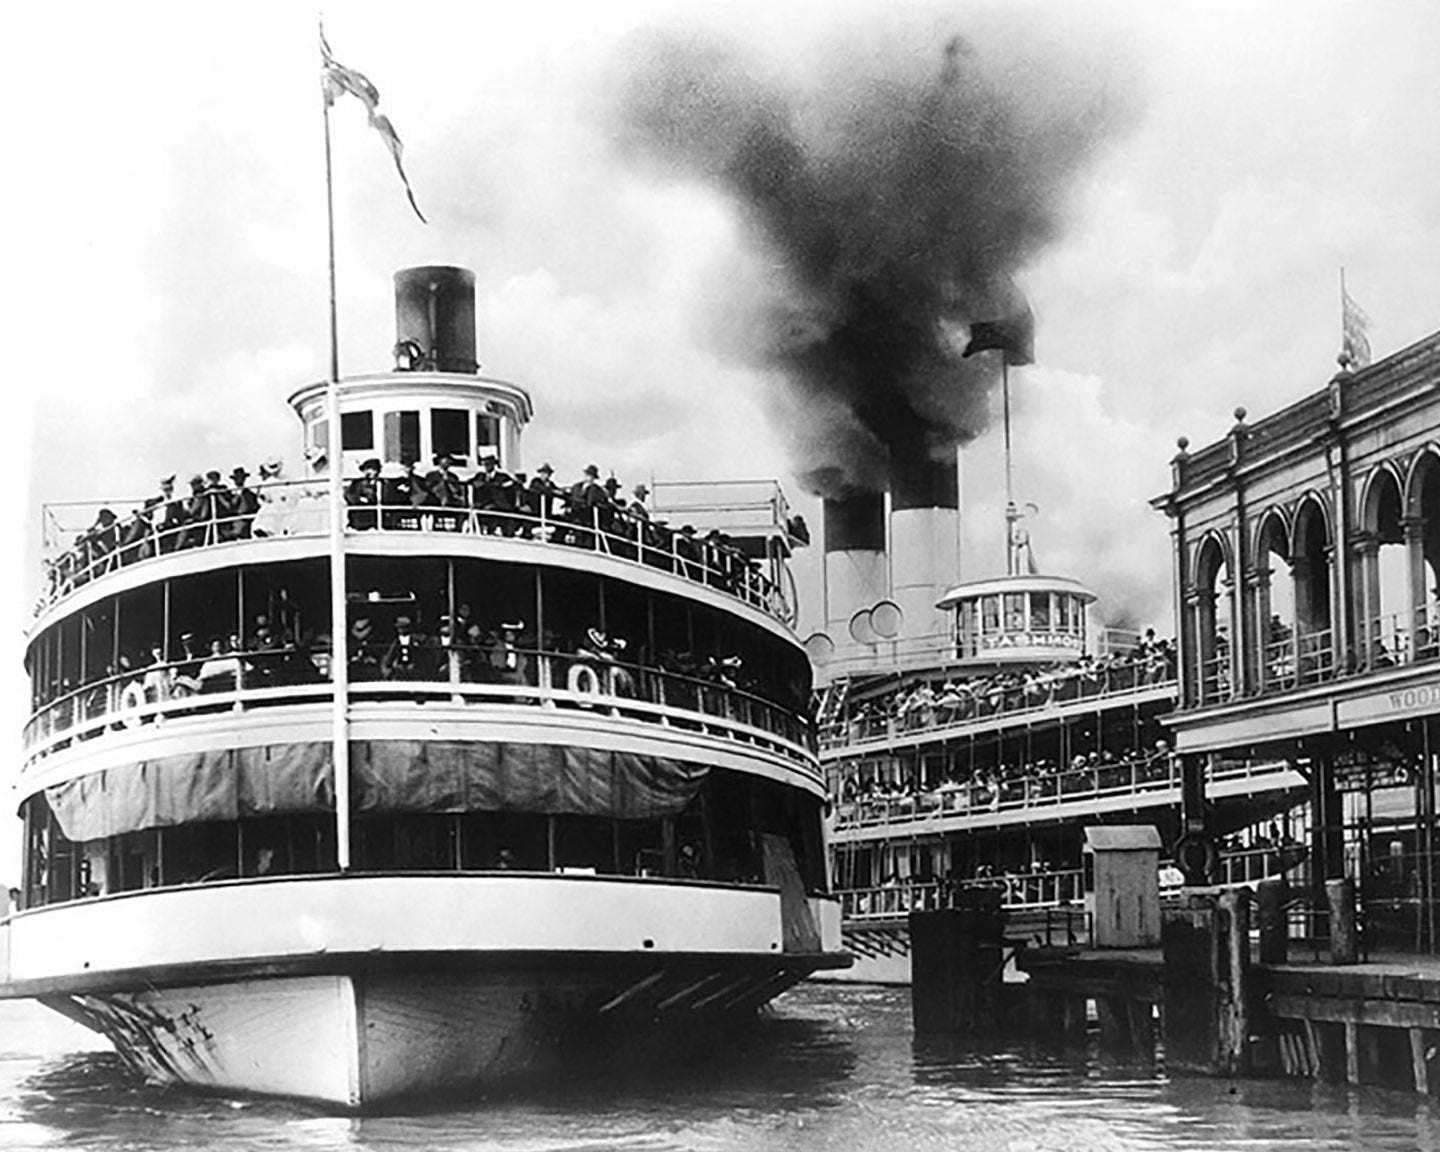 Woodward, double-decker pleasure boat (1900) - Officially Licensed Detroit News Coaster